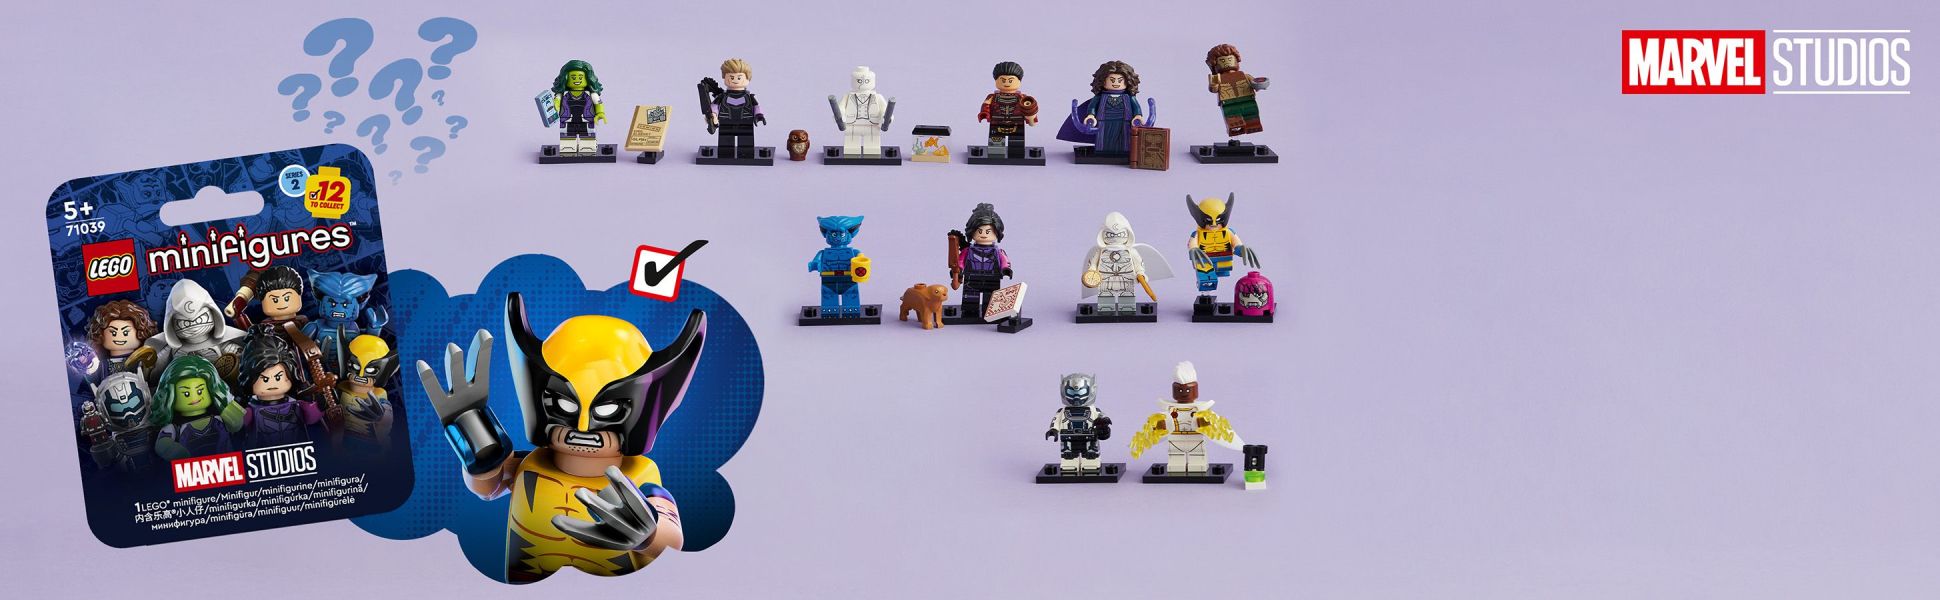 LEGO 71039 Marvel Studios Collectable Minifigures Series 2 review